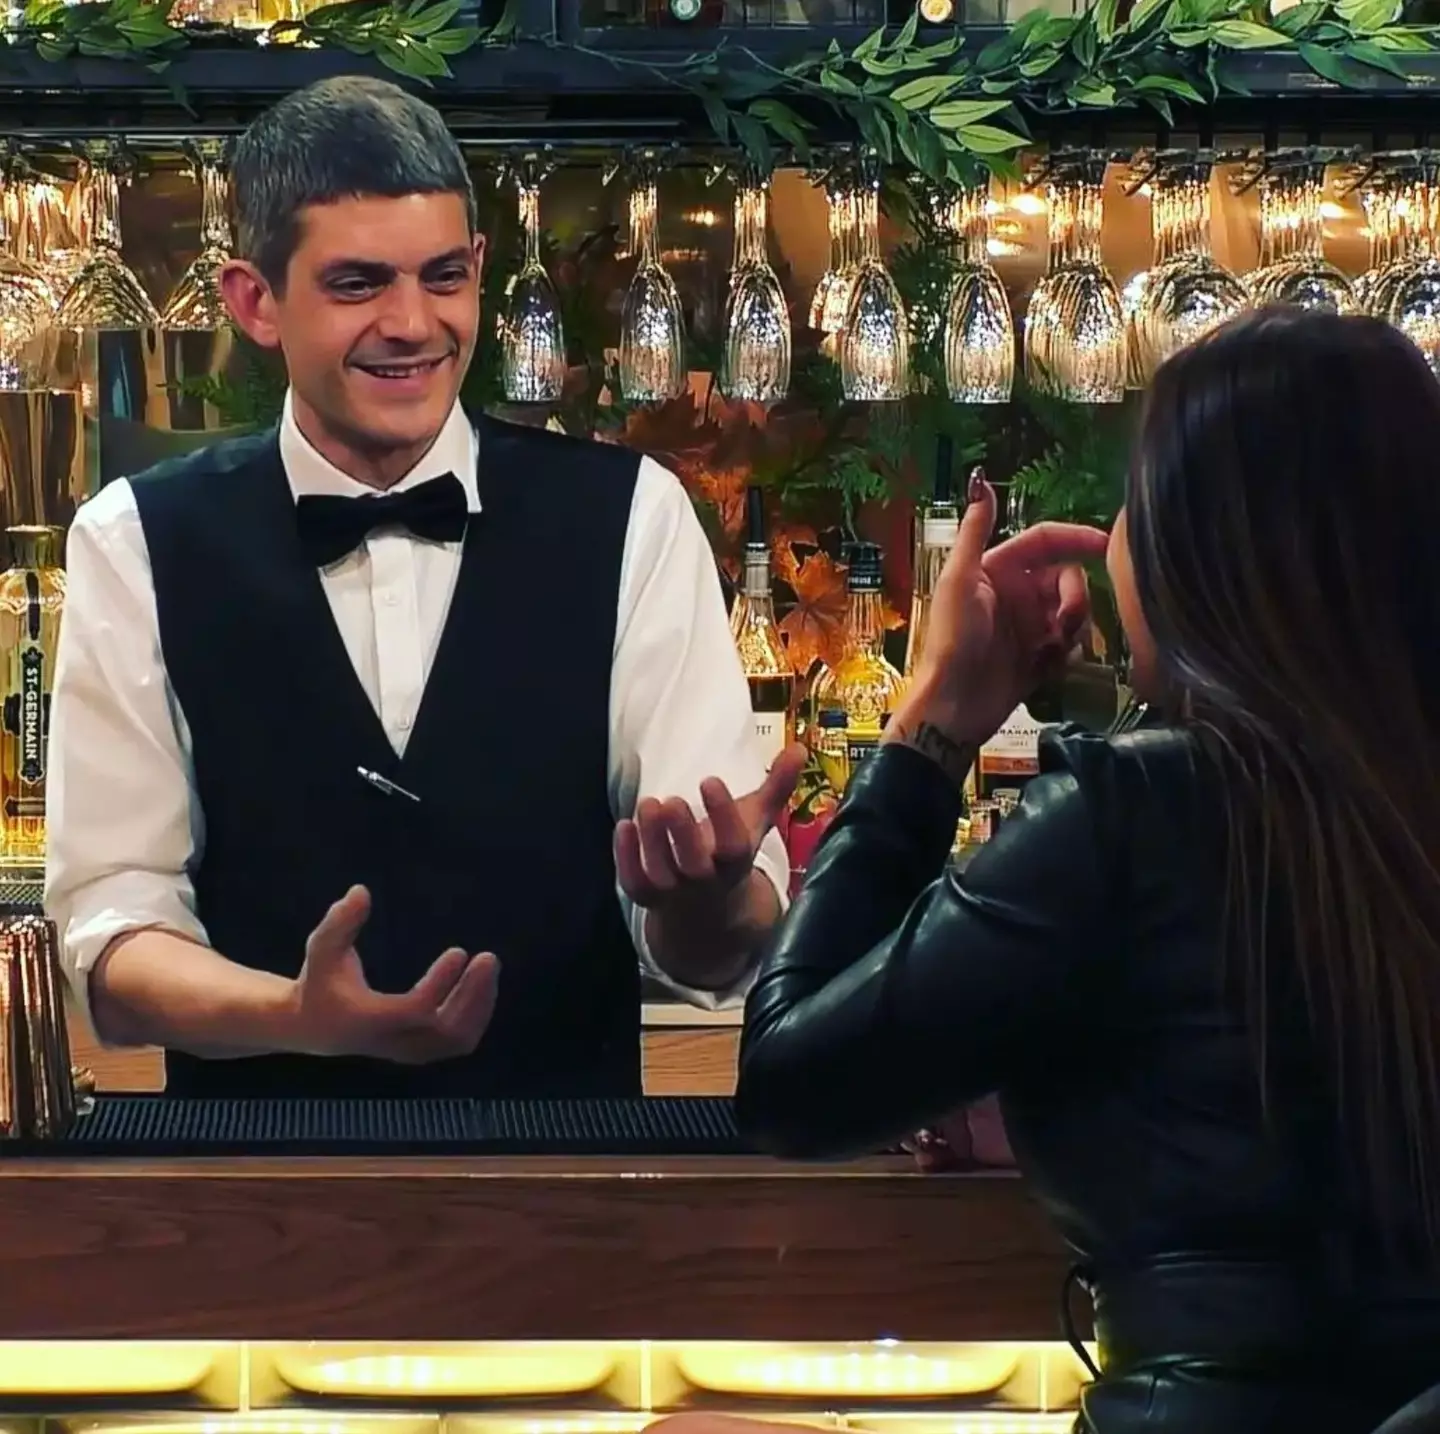 Merlin is best known as First Dates' resident barman.